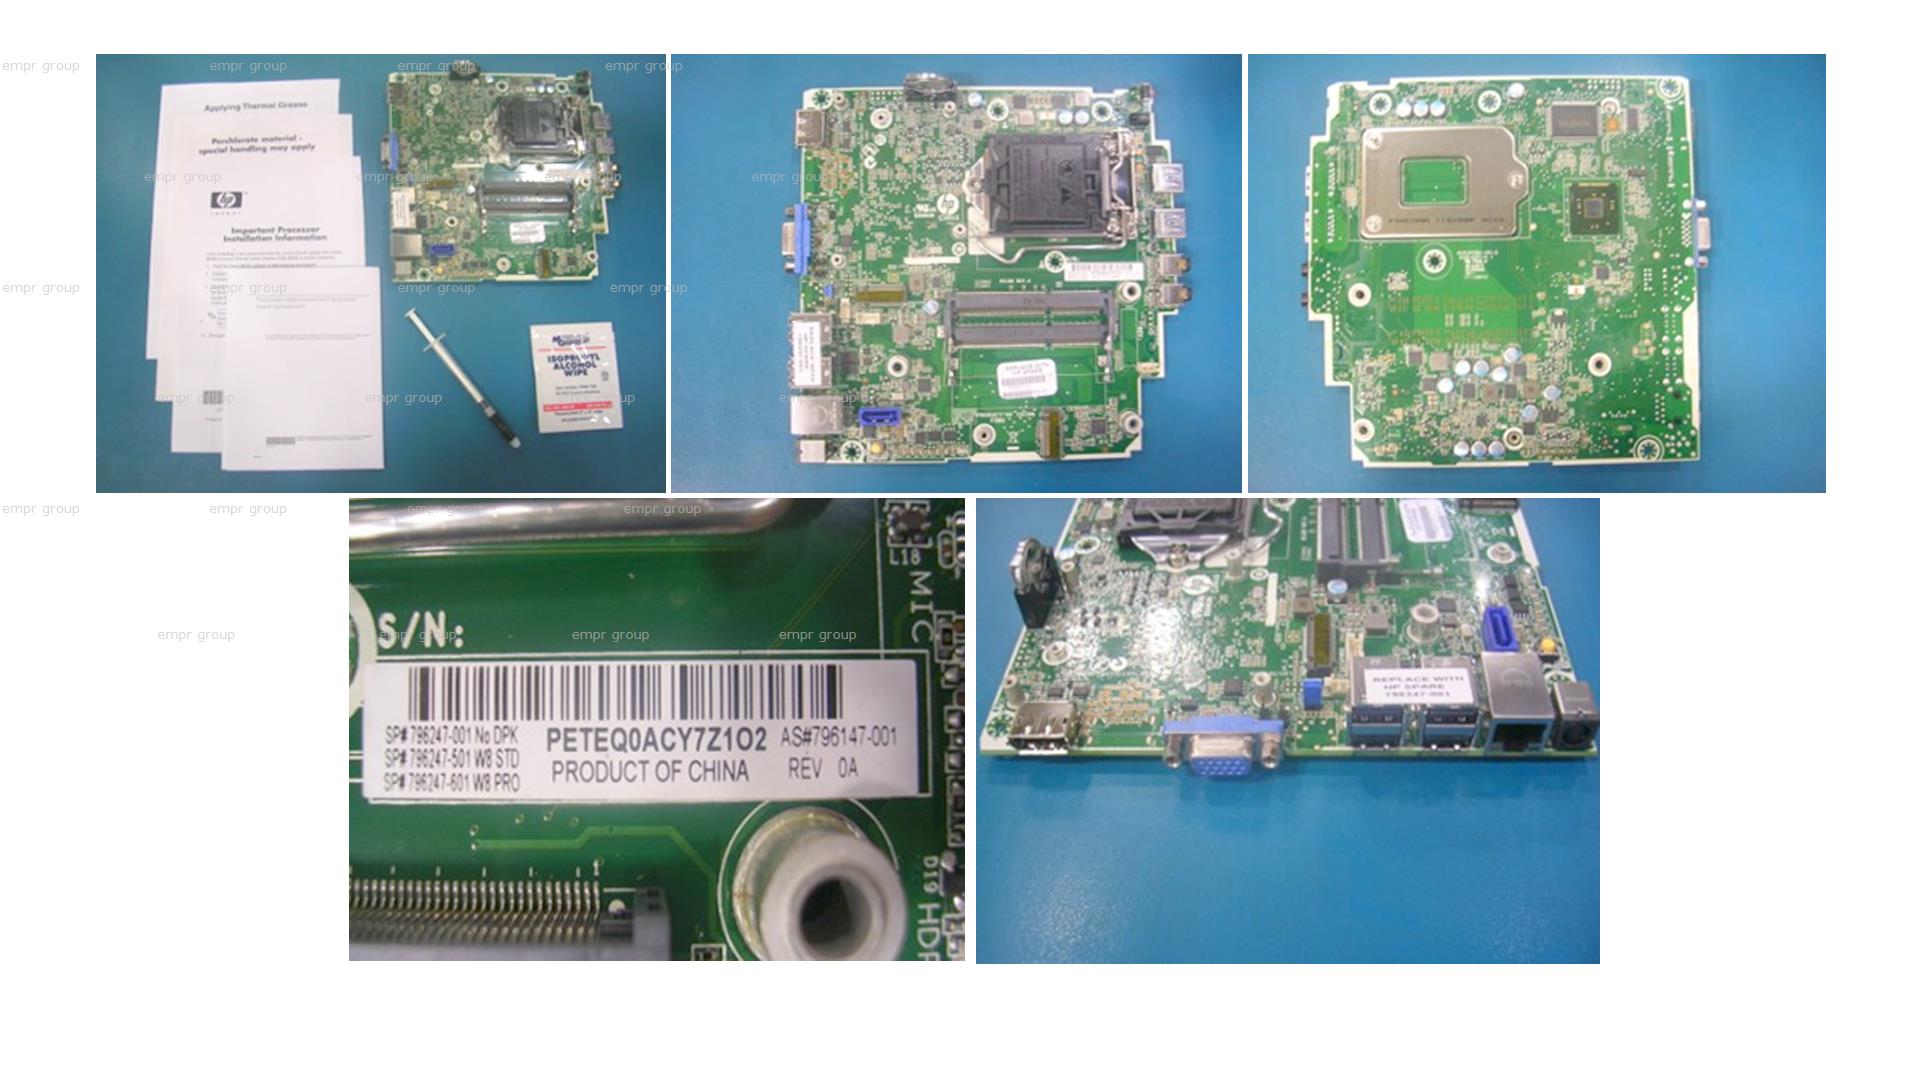 HP PRODESK 400 G1 SMALL FORM FACTOR PC - N4D06US PC Board 796247-501